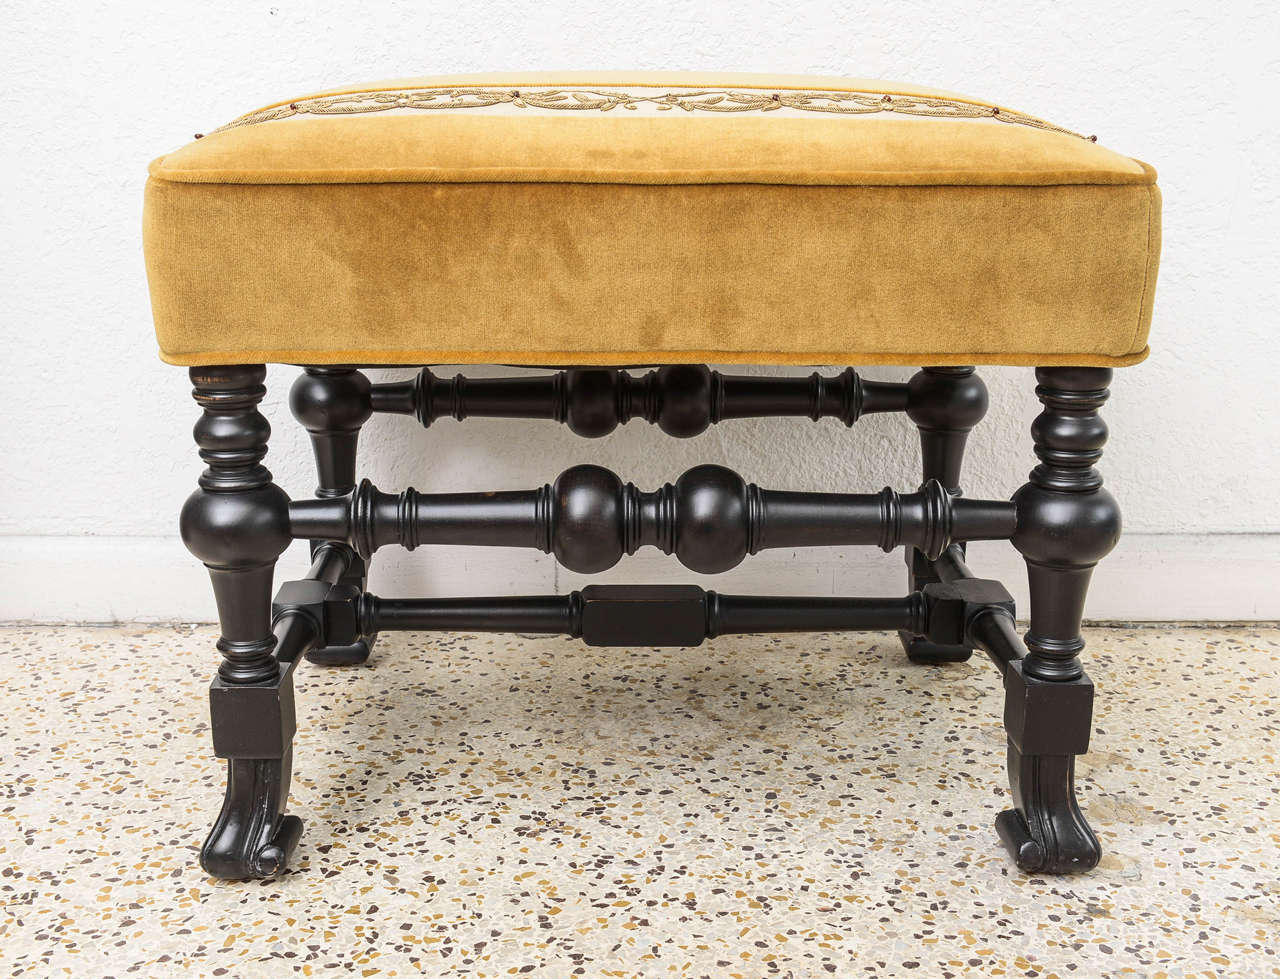 Pair of 19th century Italian stools with an ebony dark finish on the wood frame which is detailed with a Flemish-Foot . The pieces are upholstered in a gold Velvet fabric with an insert banding, which has a stylized floral embroidered detail of